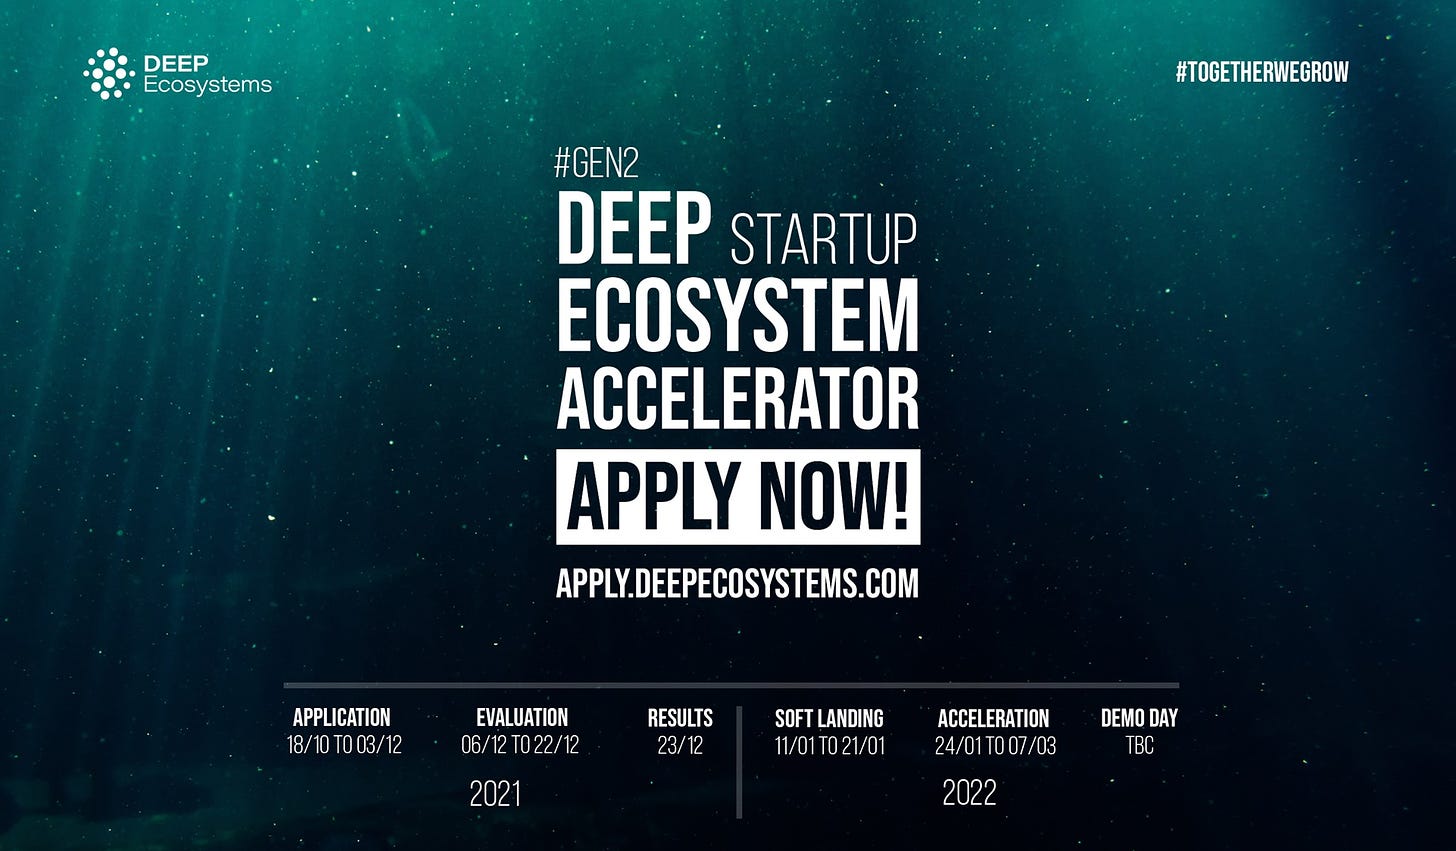 May be an image of text that says 'DEEP Ecosystems #TOGETHERWEGROW #GEN2 DEEP STARTUP ECOSYSTEM ACCELERATOR APPLY NOW! APPLY.DEEPECOSYSTEMS.COM APPLICATION 18/10T003/12 EVALUATION 06/12T022/12 2021 RESULTS 23/12 SOFT TLANDING 11/01T021/01 ACCELERATION 24/01 007/03 DEMO DAY TBC 2022'